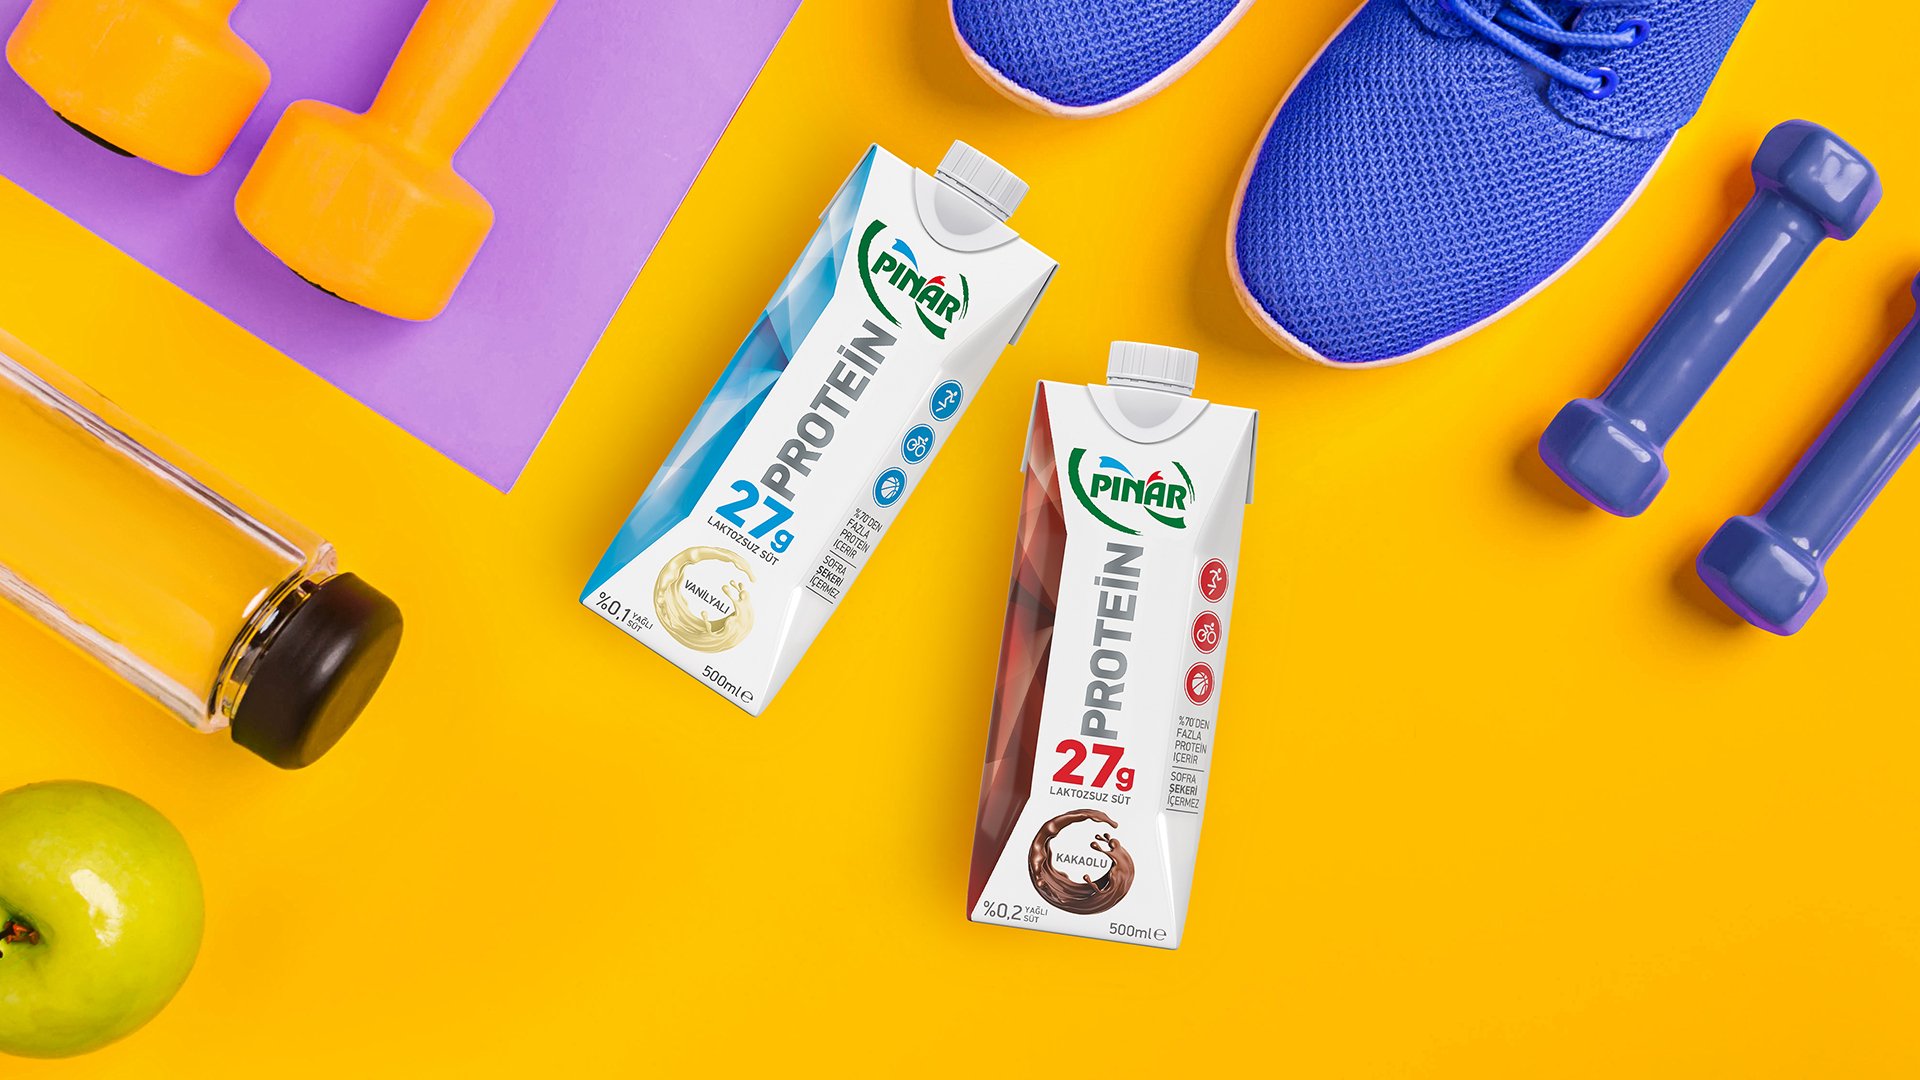 Pinar protein milk Tetra Pak packages of vanilla and cocoa variants next training equipment